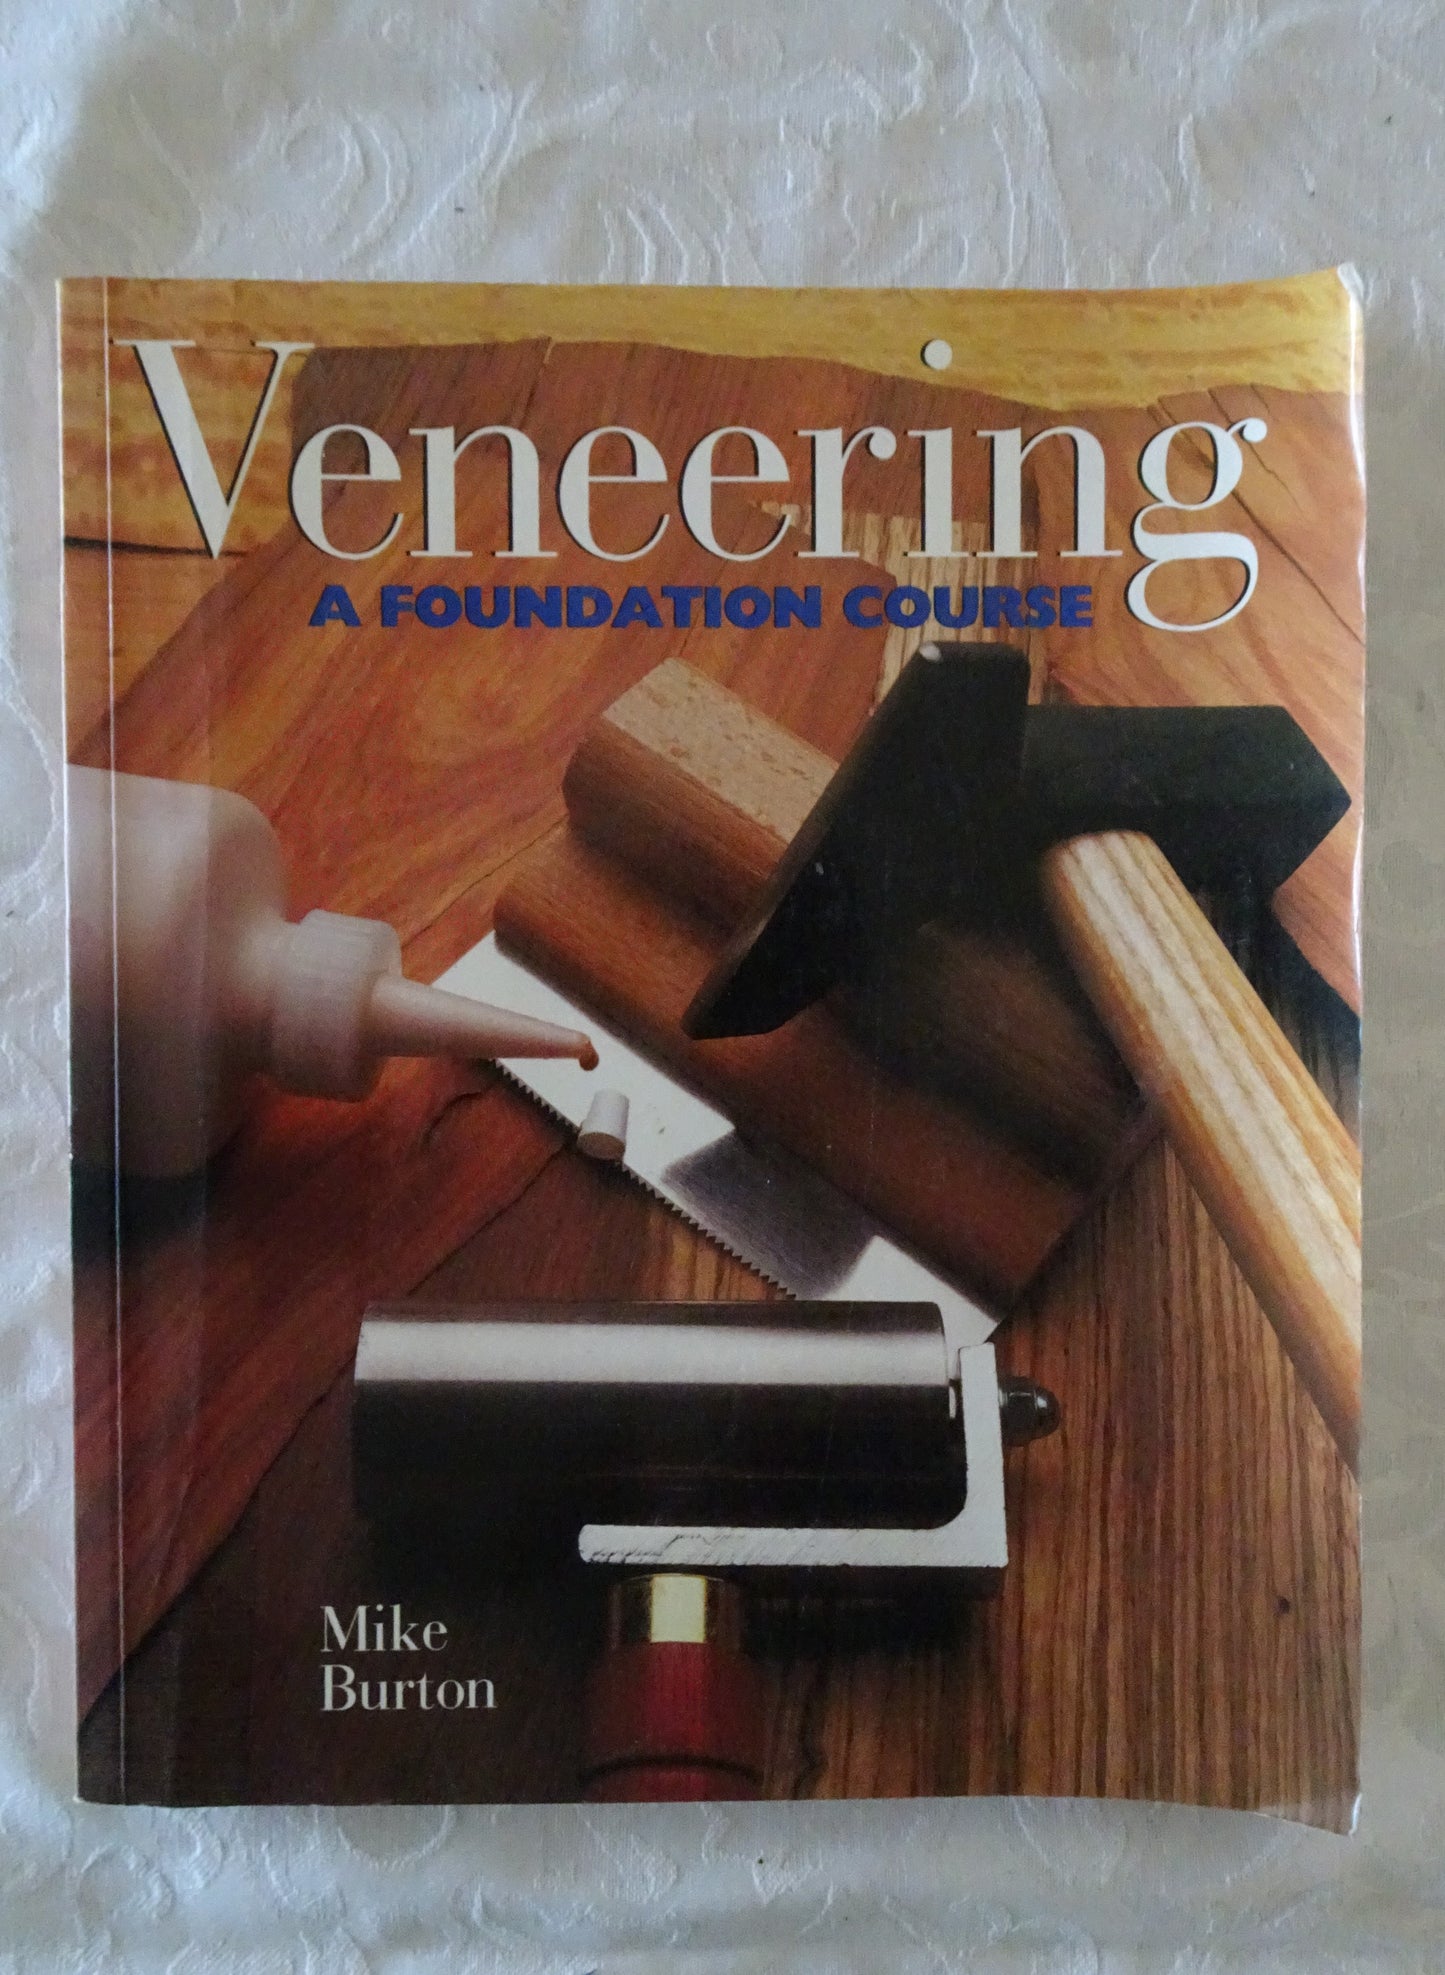 Veneering A Foundation Course by Mike Burton